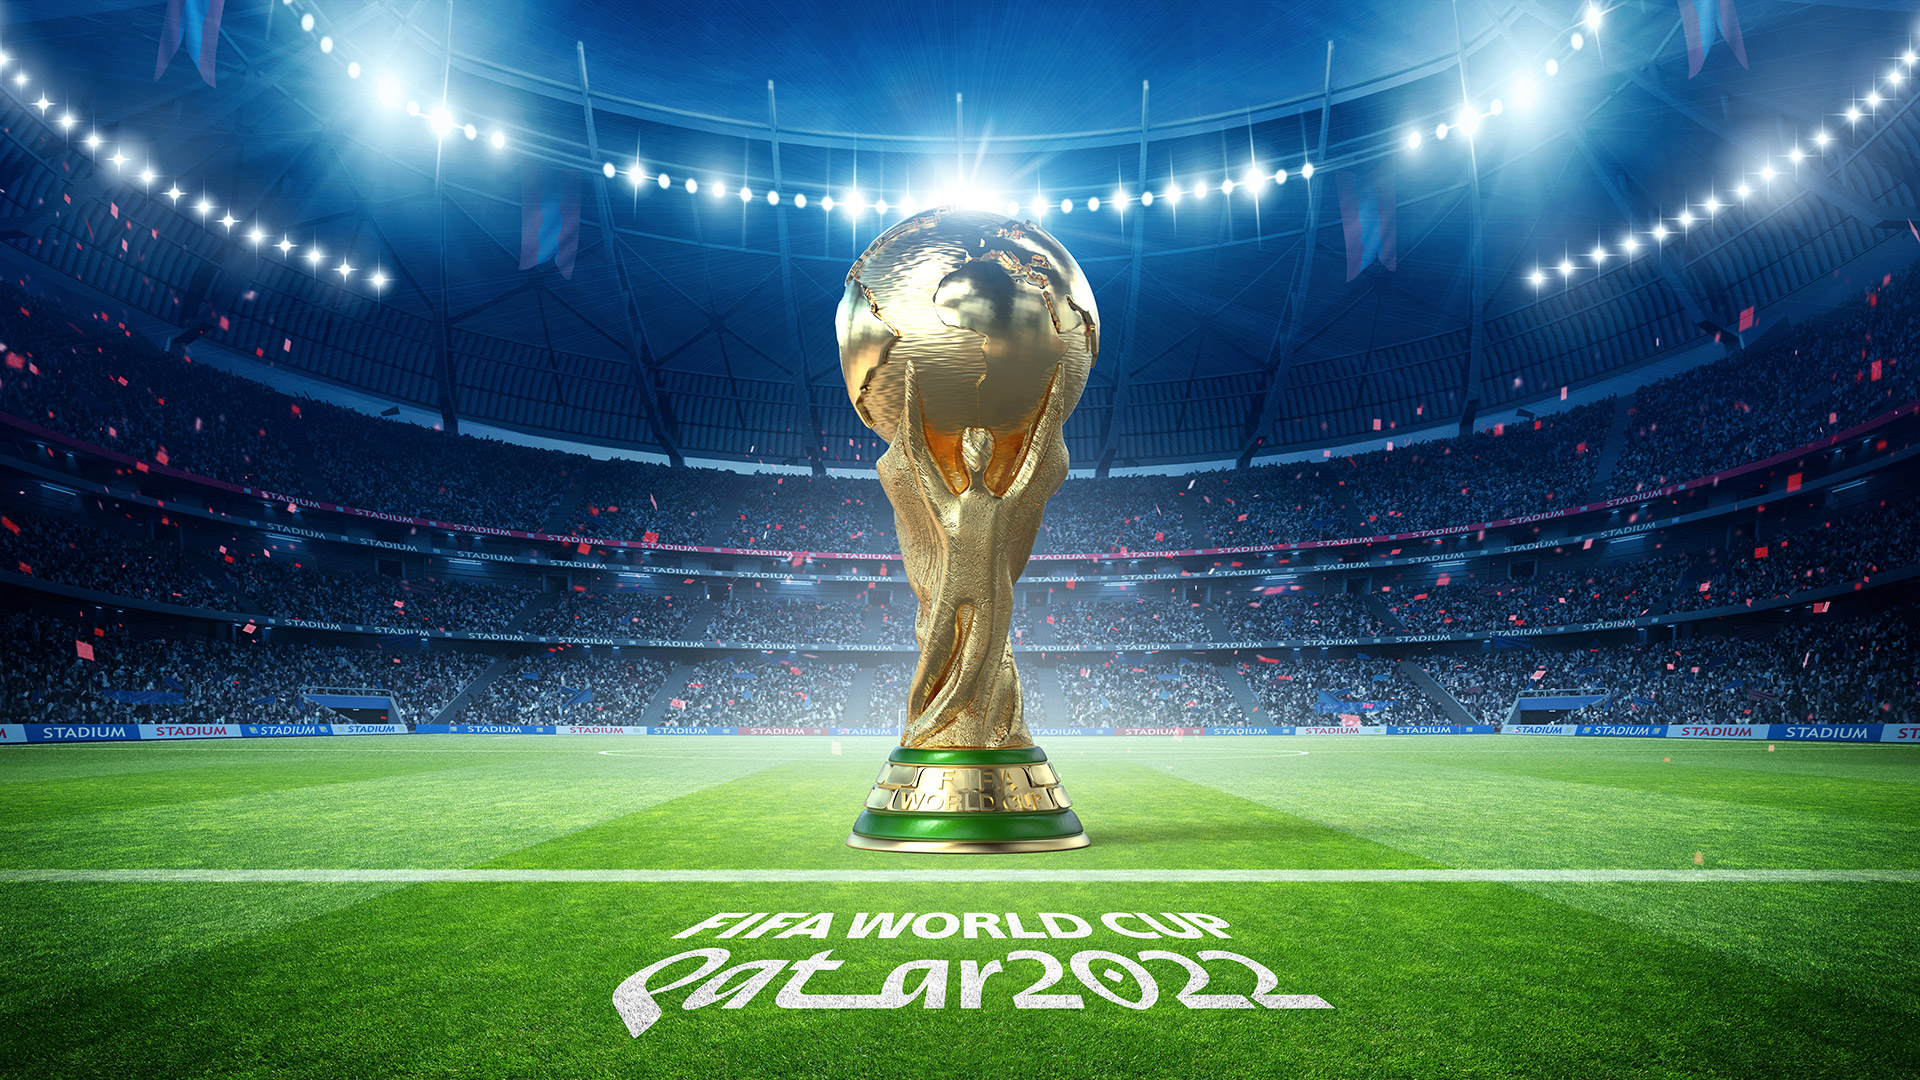 The world cup from a hospitality perspective